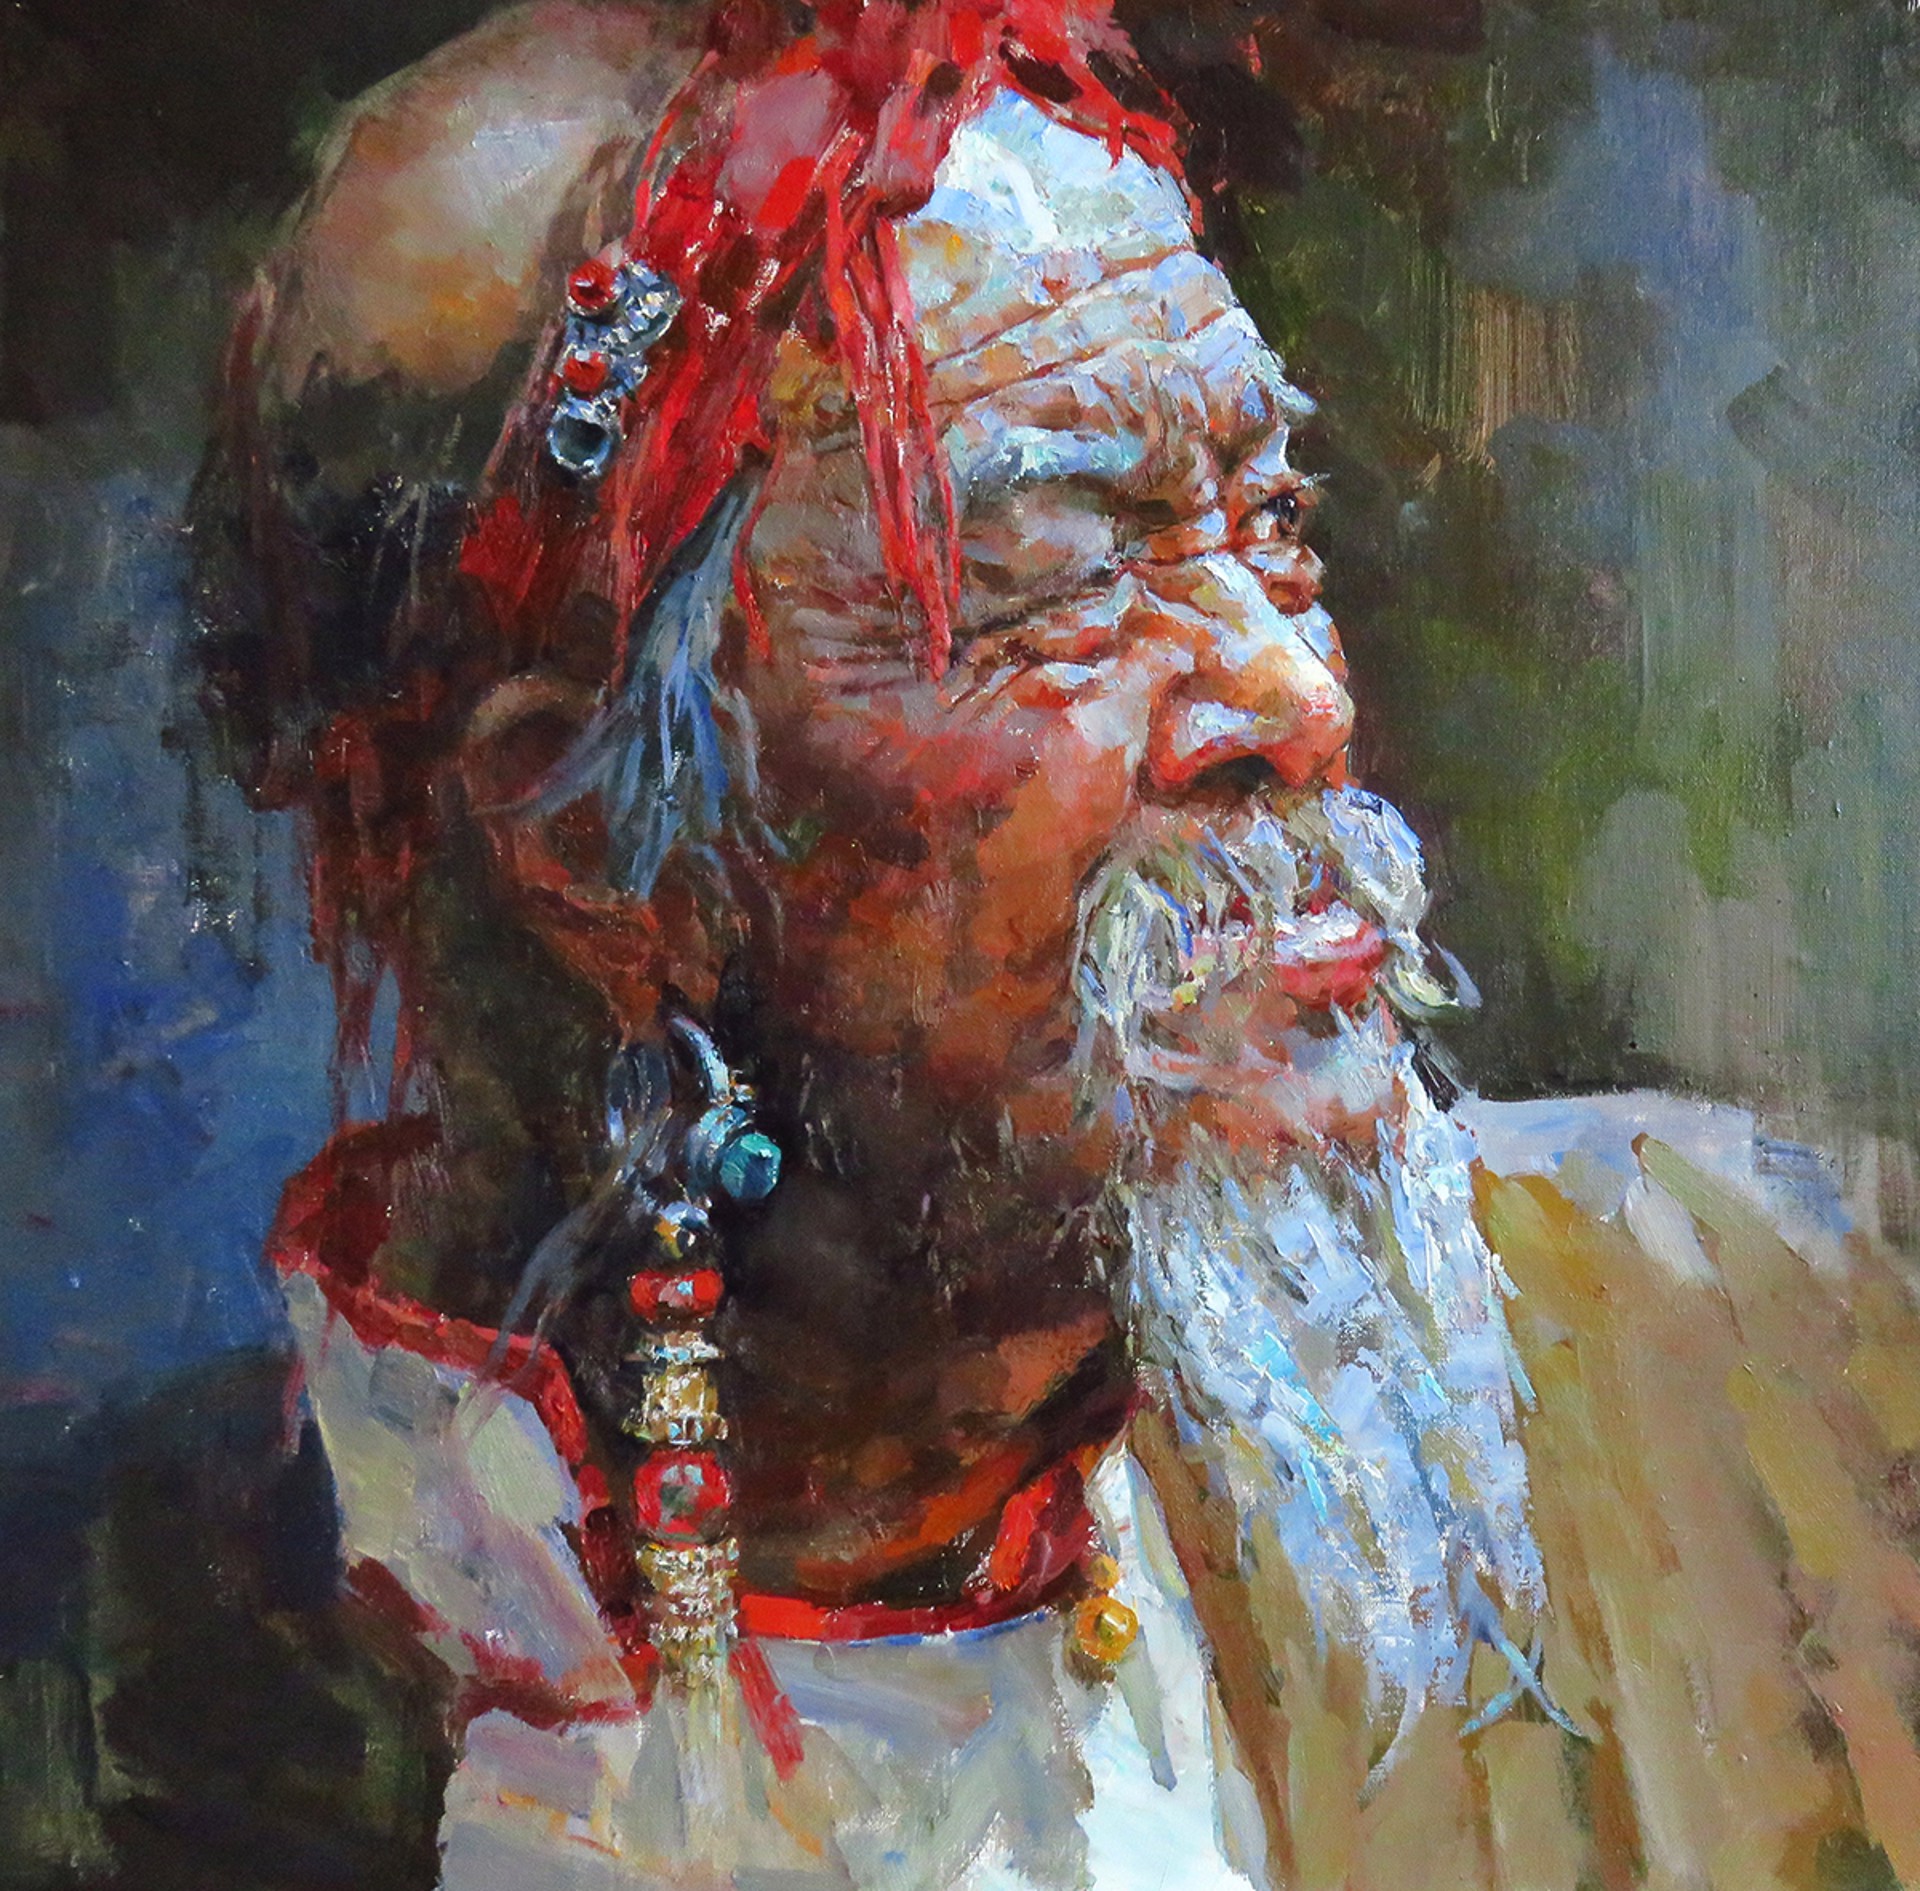 Christopher Zhang, OPAM "Old Tibetan Chief" by Oil Painters of America